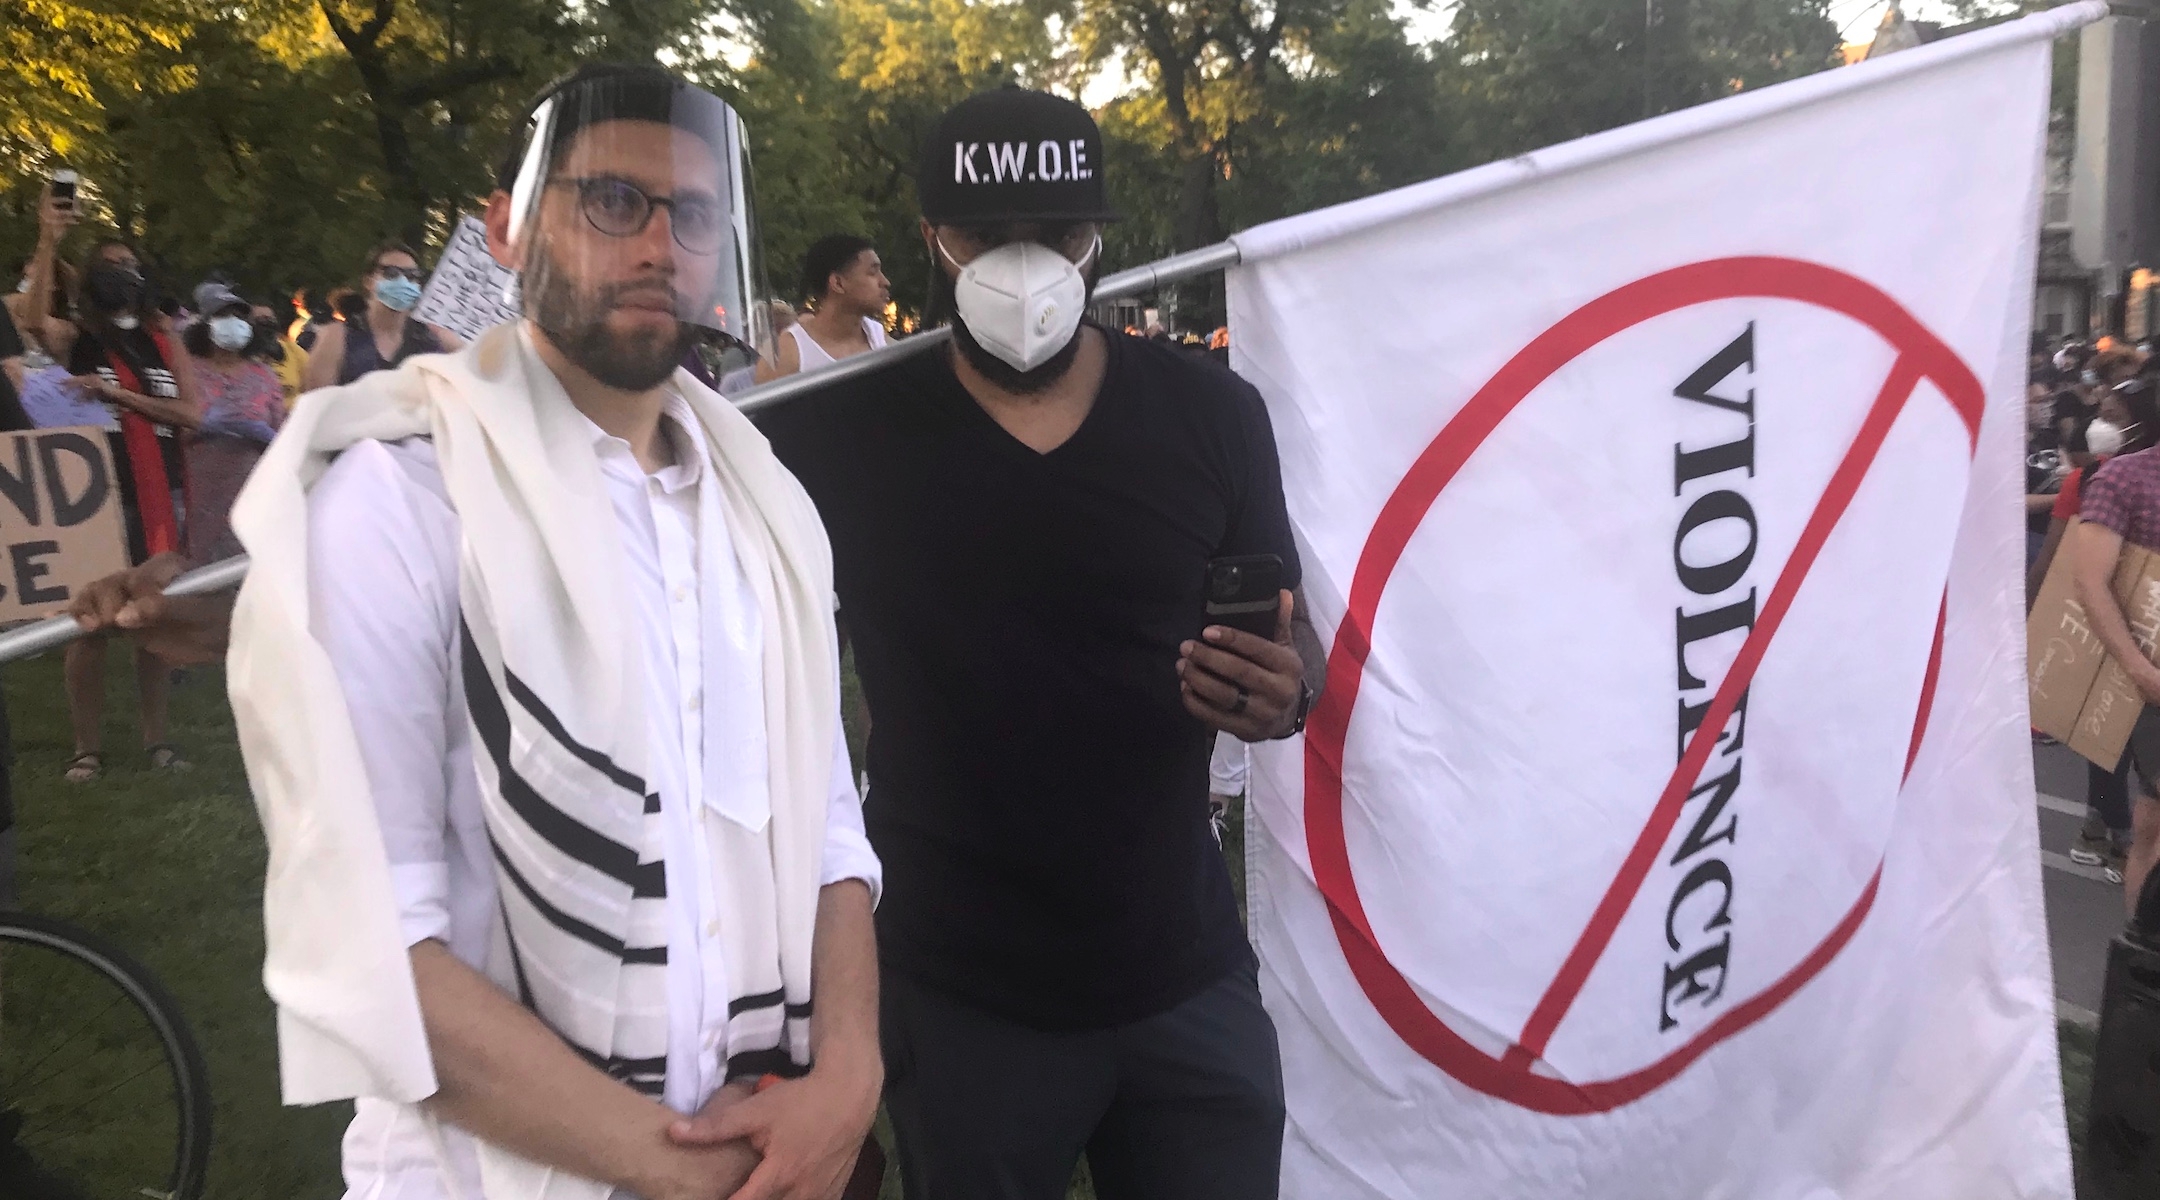 Rabbi Ari Hart, wearing a prayer shawl and face shield, stands with another protester at the interfaith demonstration in memory of George Floyd and protesting systemic racism in Chicago on June 2, 2020. (Courtesy of Hart)